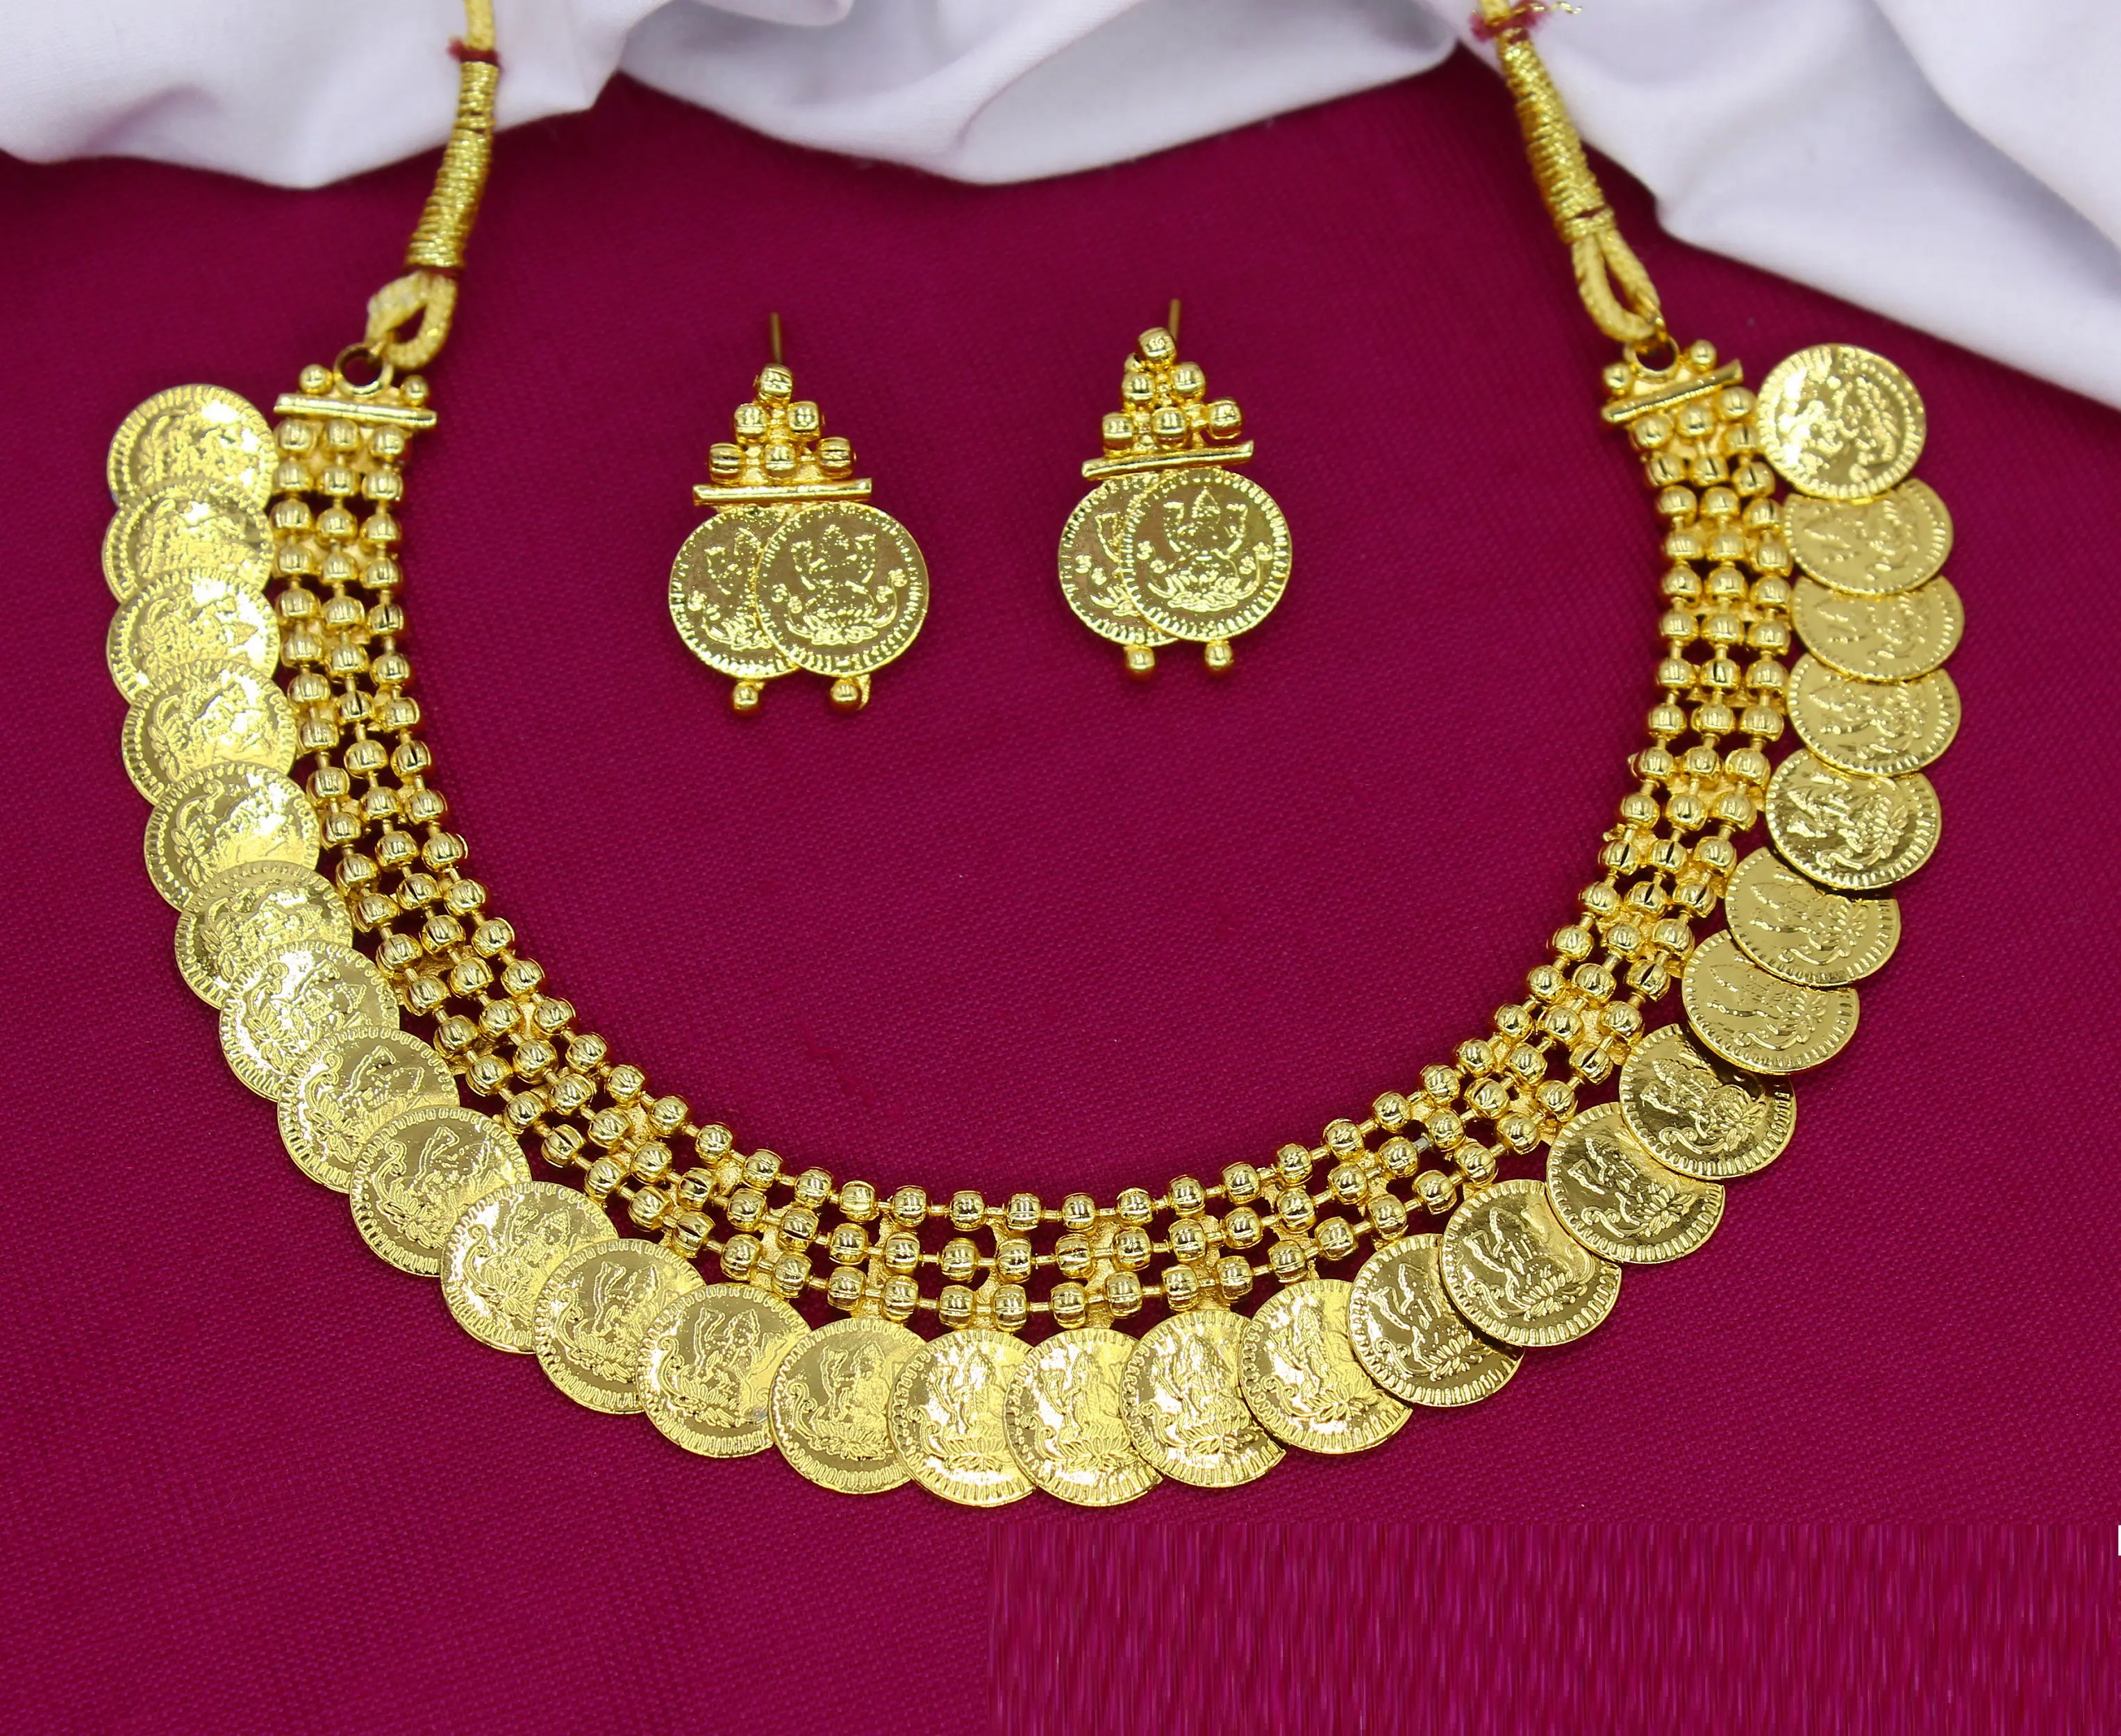 Necklace with earrings jewellery set goldplated pure brass uae indian jewellery necklace coin necklace south jewellery